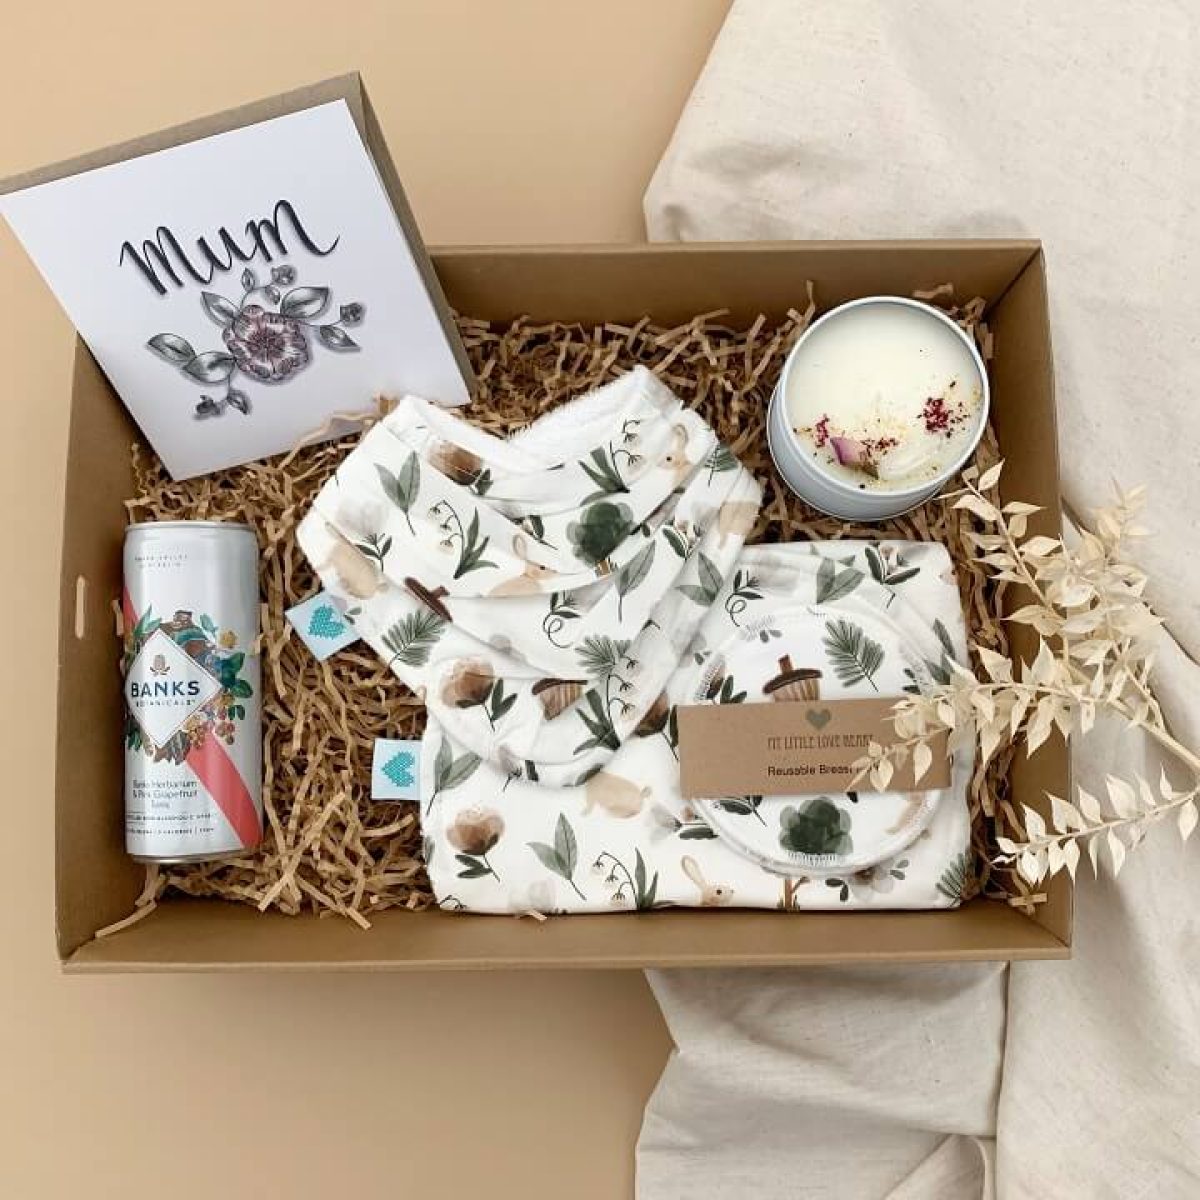 New MOM gifts for women, Care package / Gift basket idea, Mom who just gave  birth or mother to be or for a Baby Shower, Gender Reveal, Pregnancy or